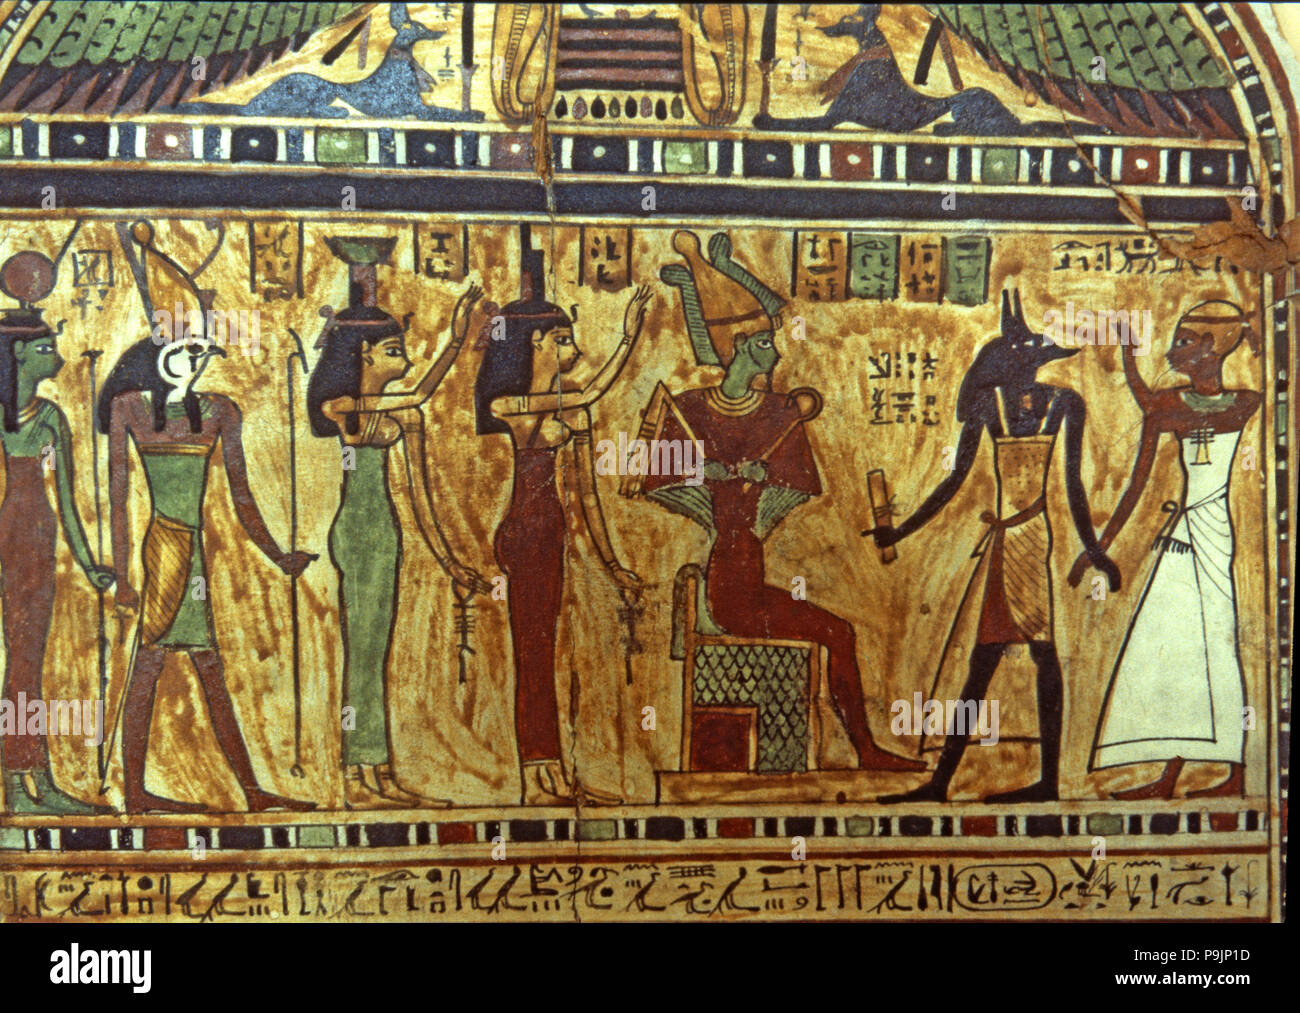 Anubis presents the deceased to Osiris, with Horus and other deities present, funerary stela from… Stock Photo